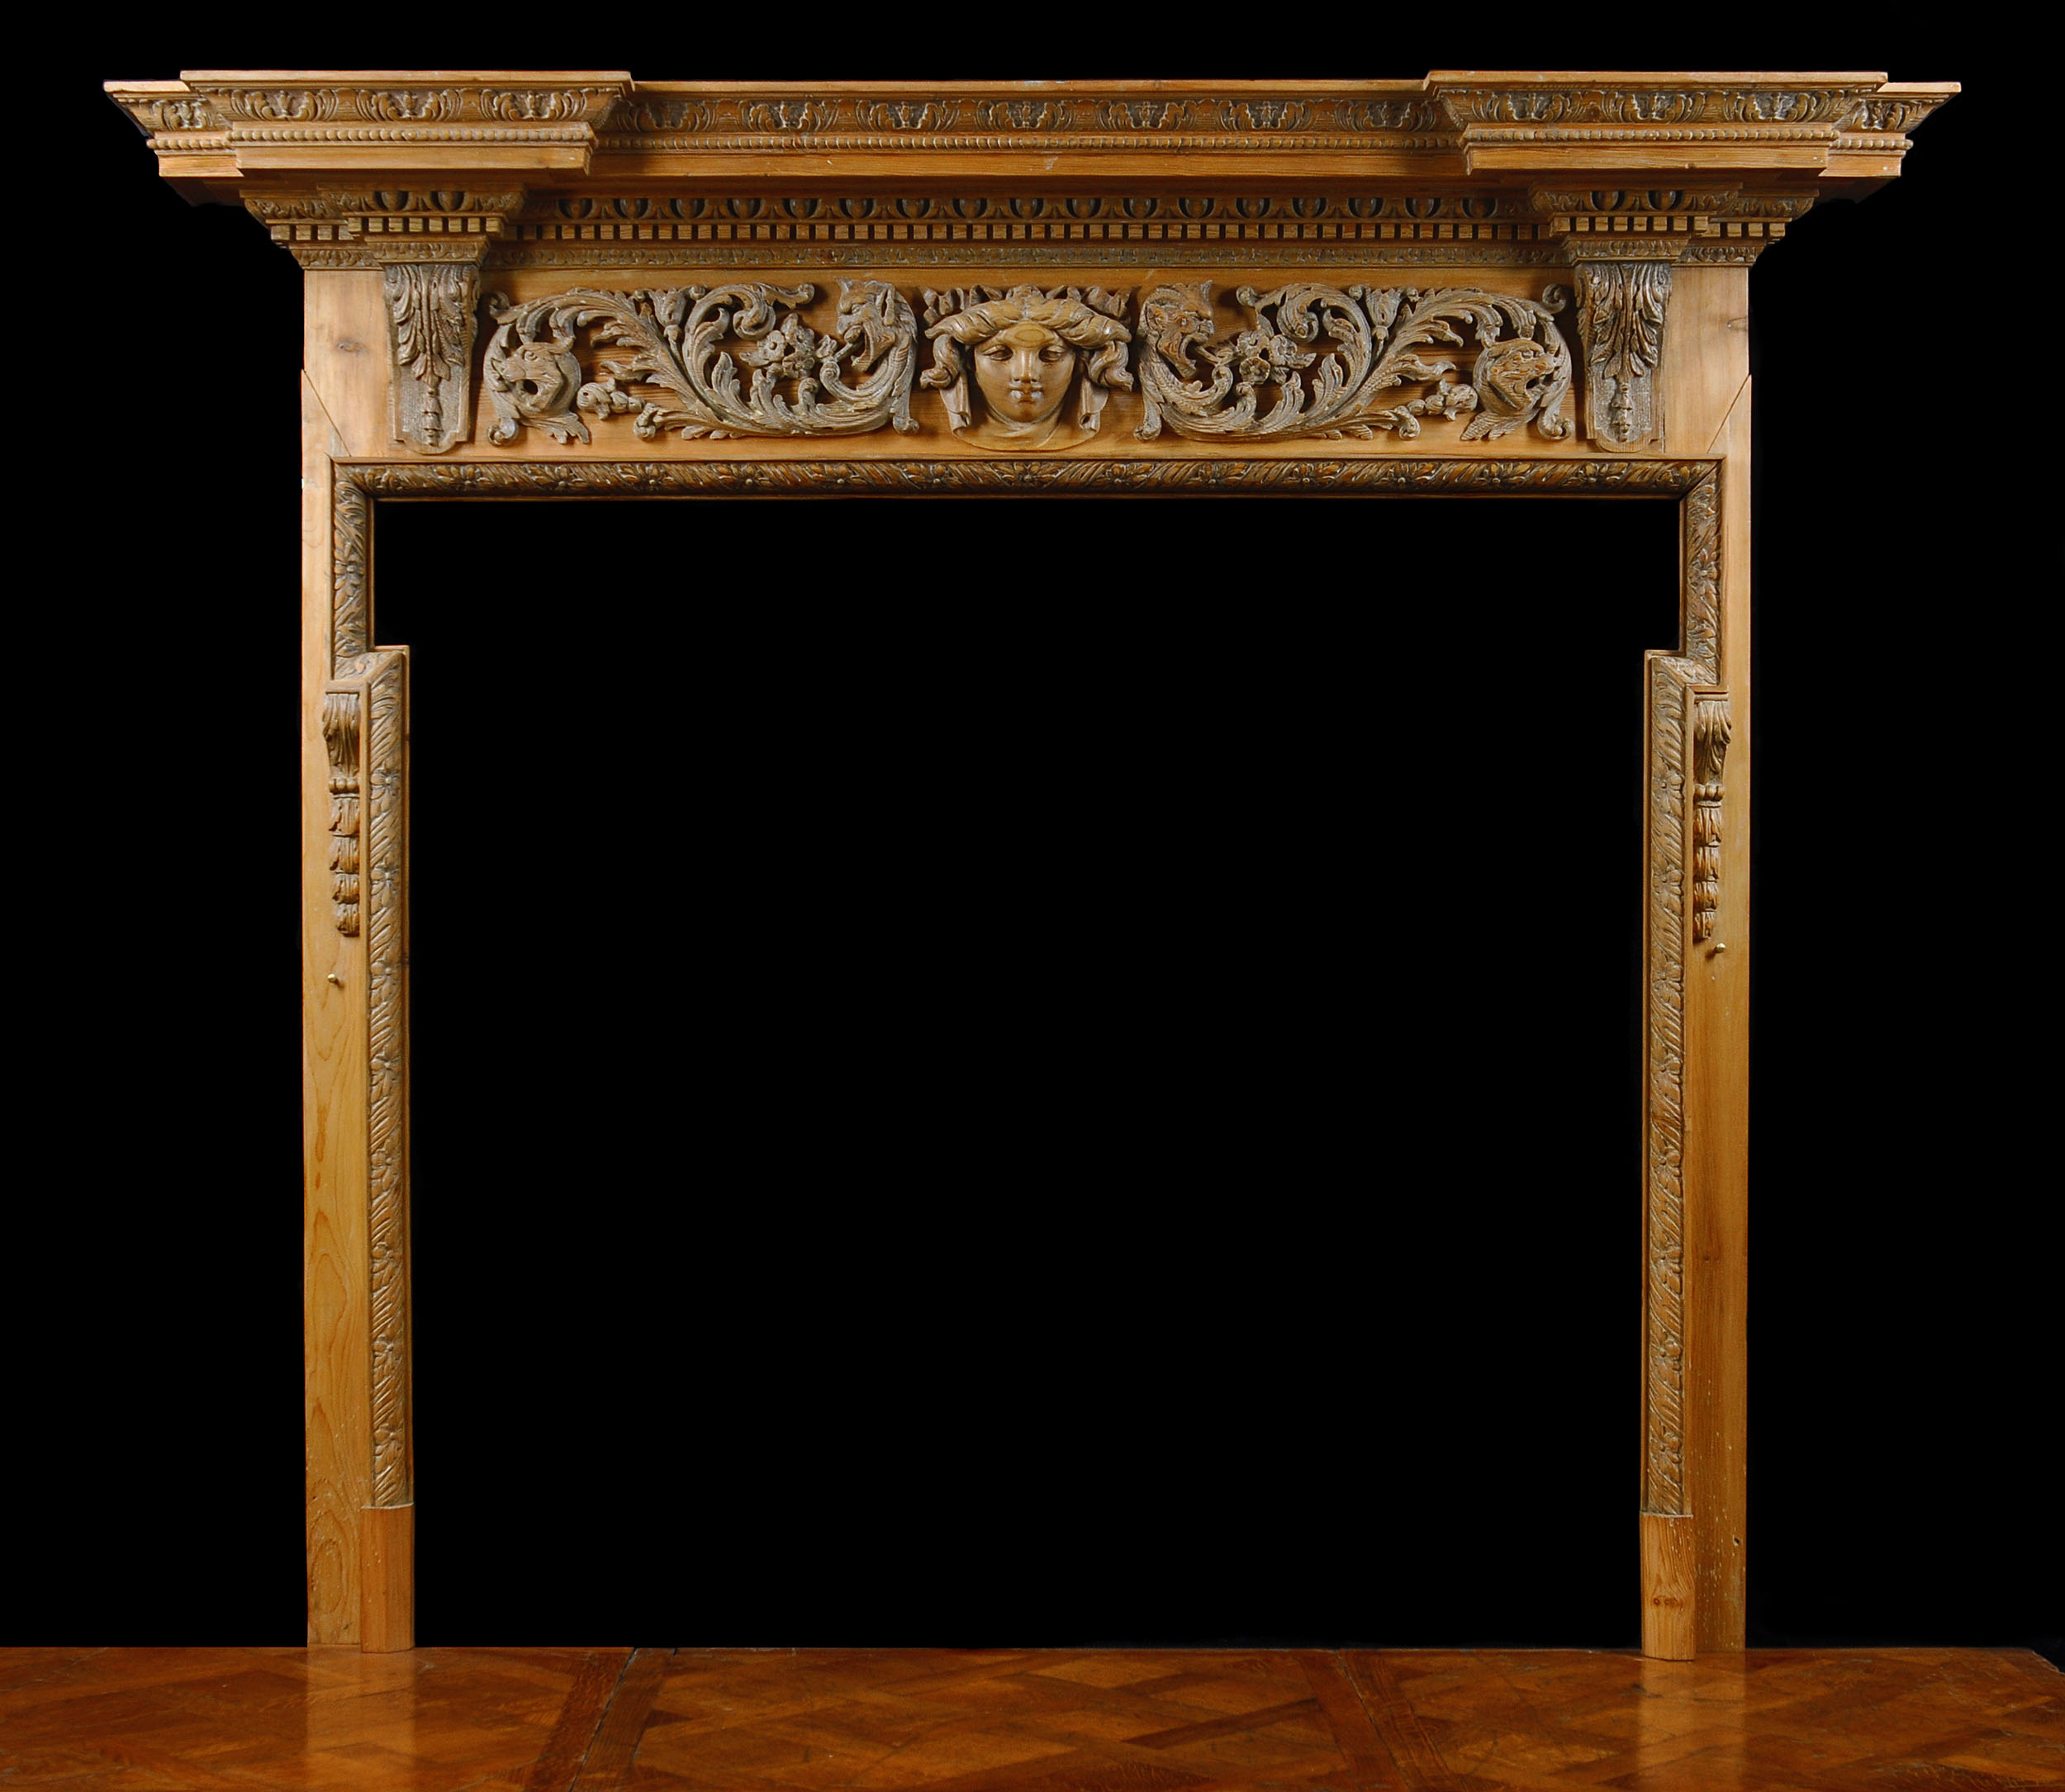 A William Kent Style Pine Fireplace Mantel